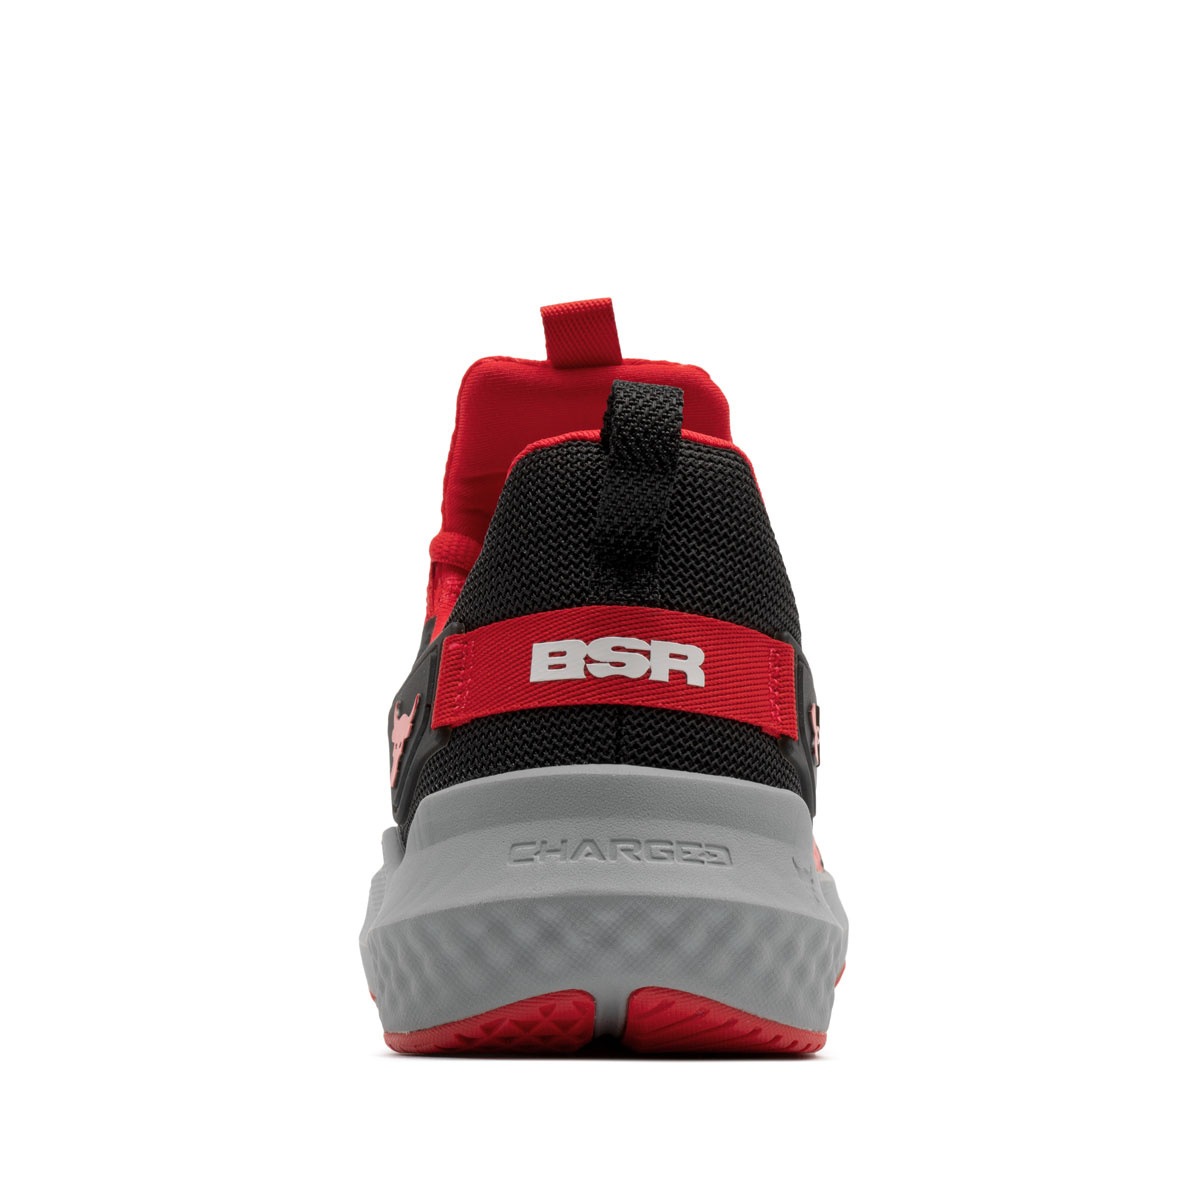 Under Armour Project Rock BSR 3 Мъжки маратонки 3026462-004